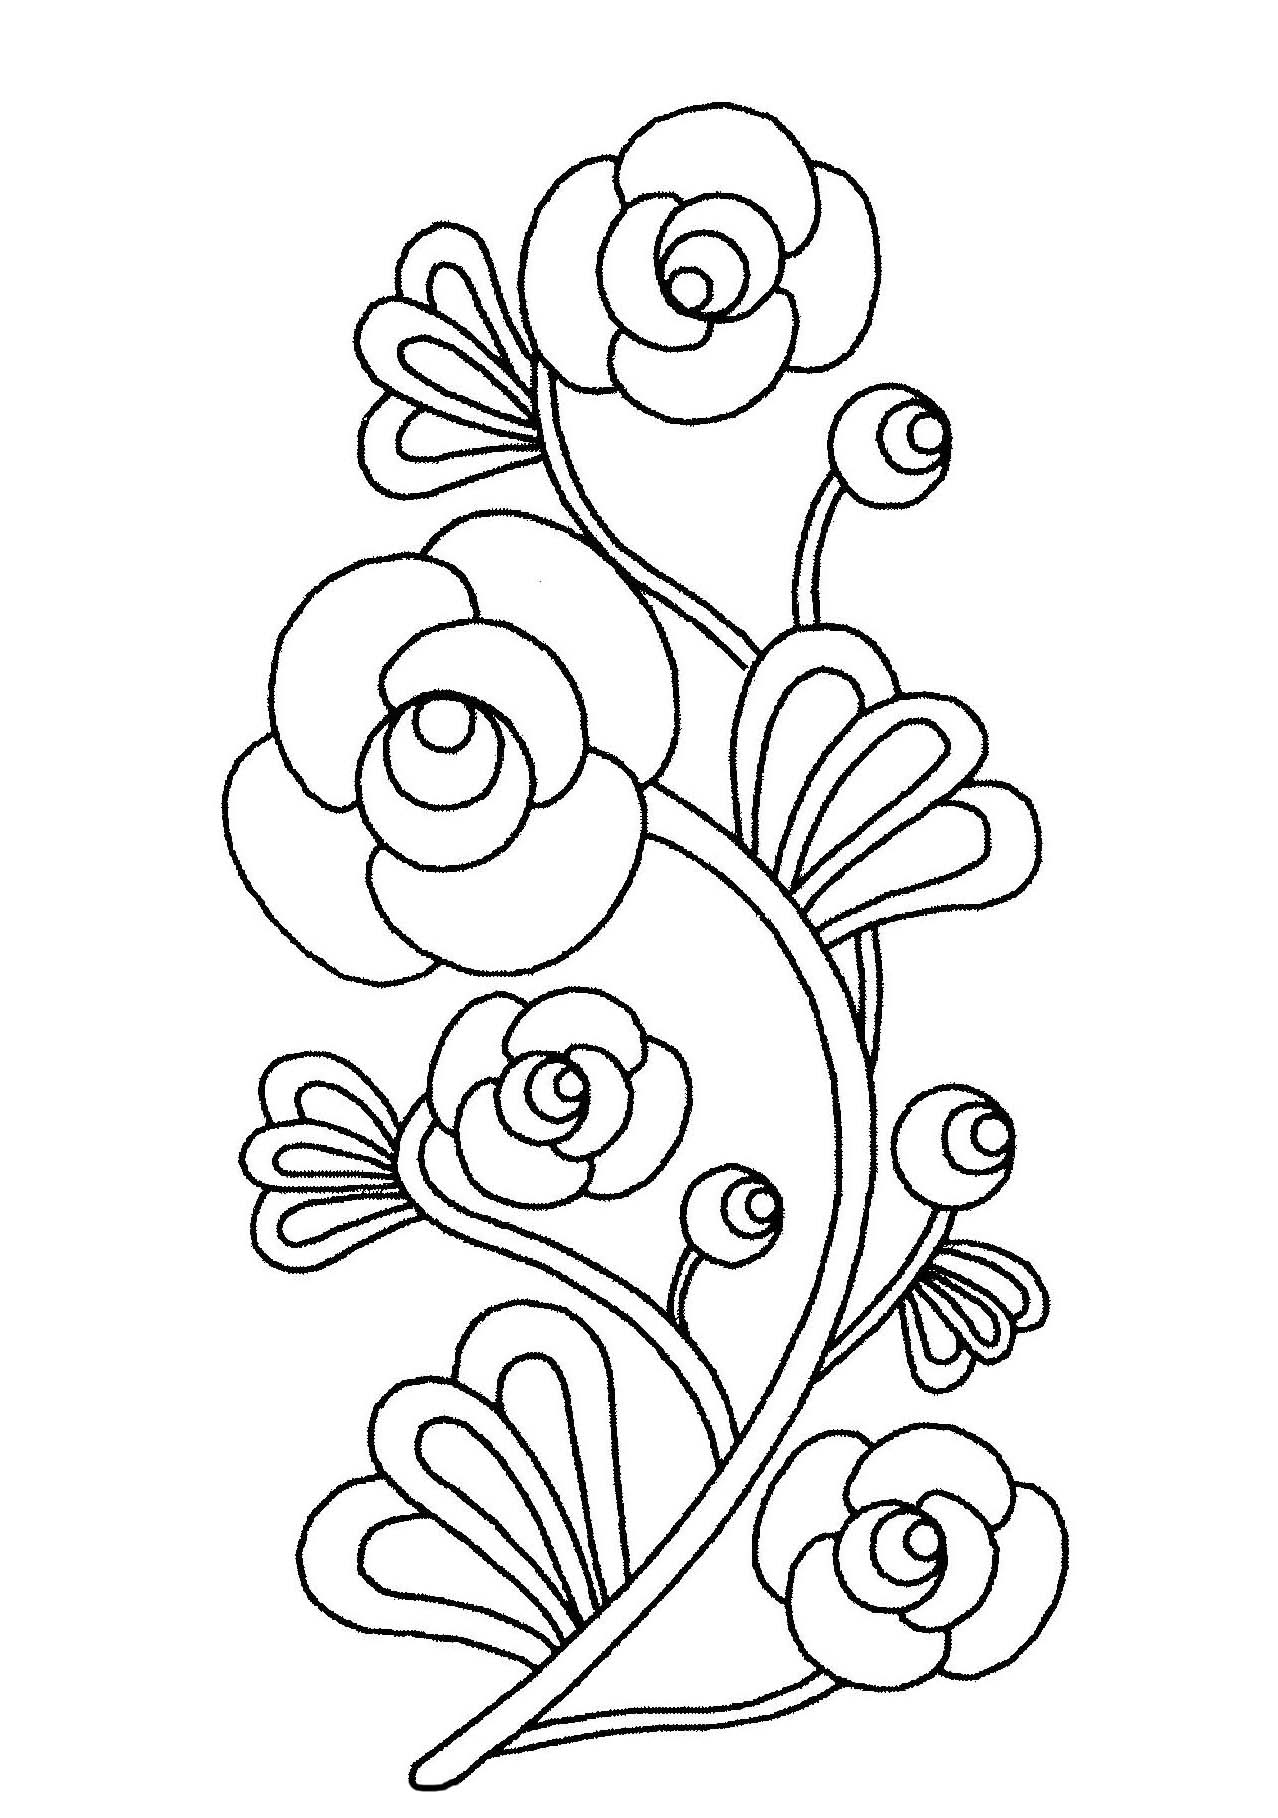 Beautiful flowers   Flowers Coloring pages for kids to print & color